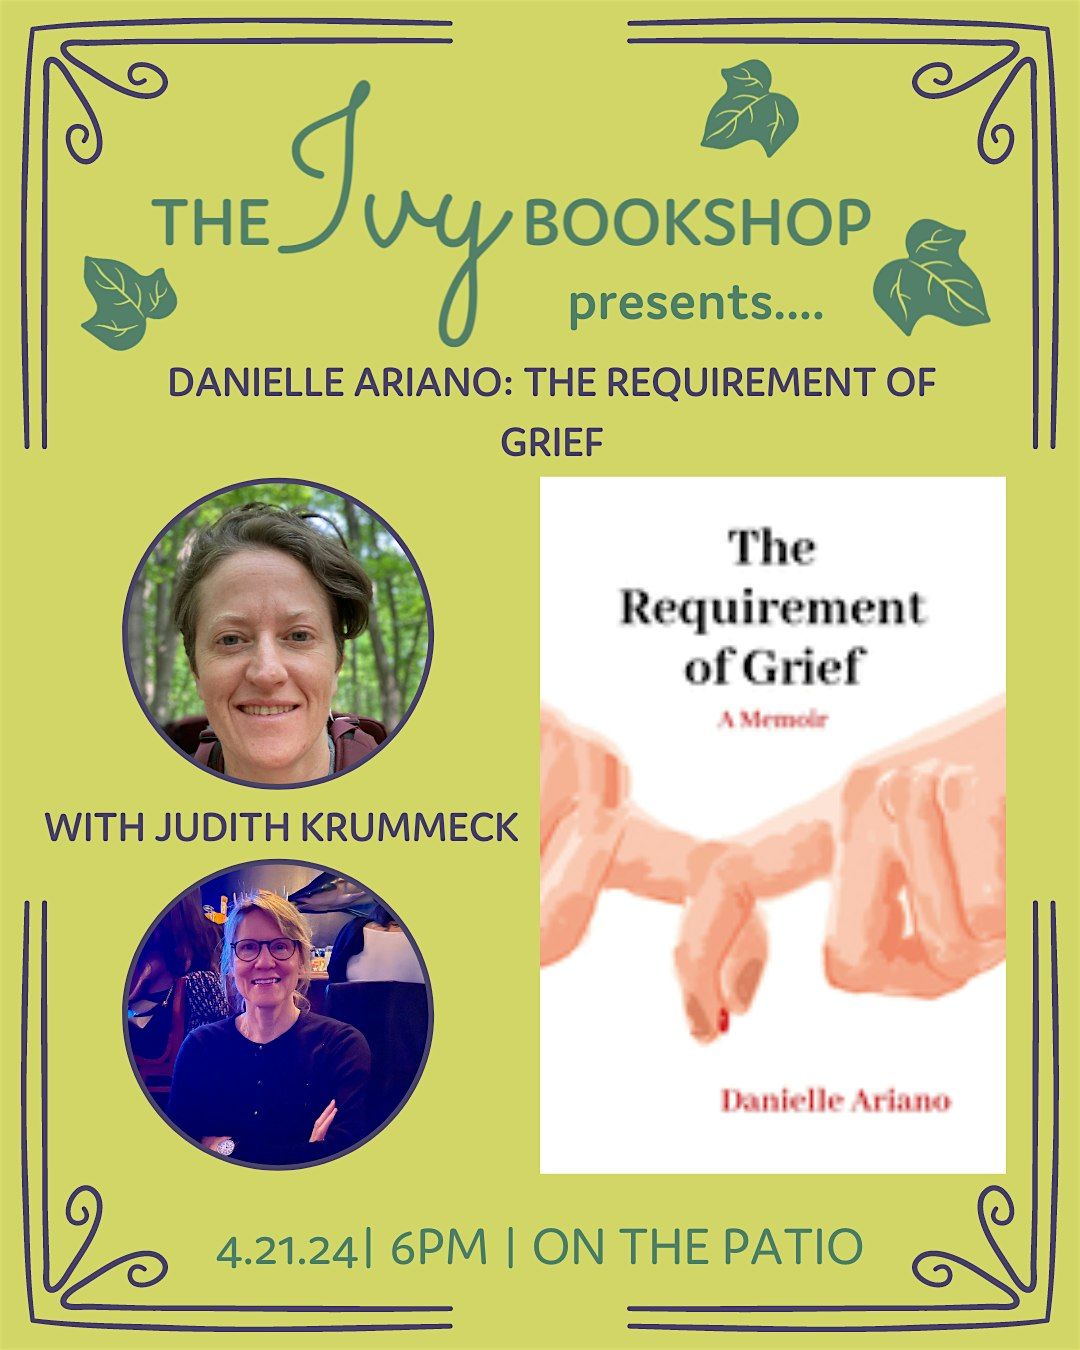 Danielle Ariano: THE REQUIREMENT OF GRIEF (with Judith Krummeck)